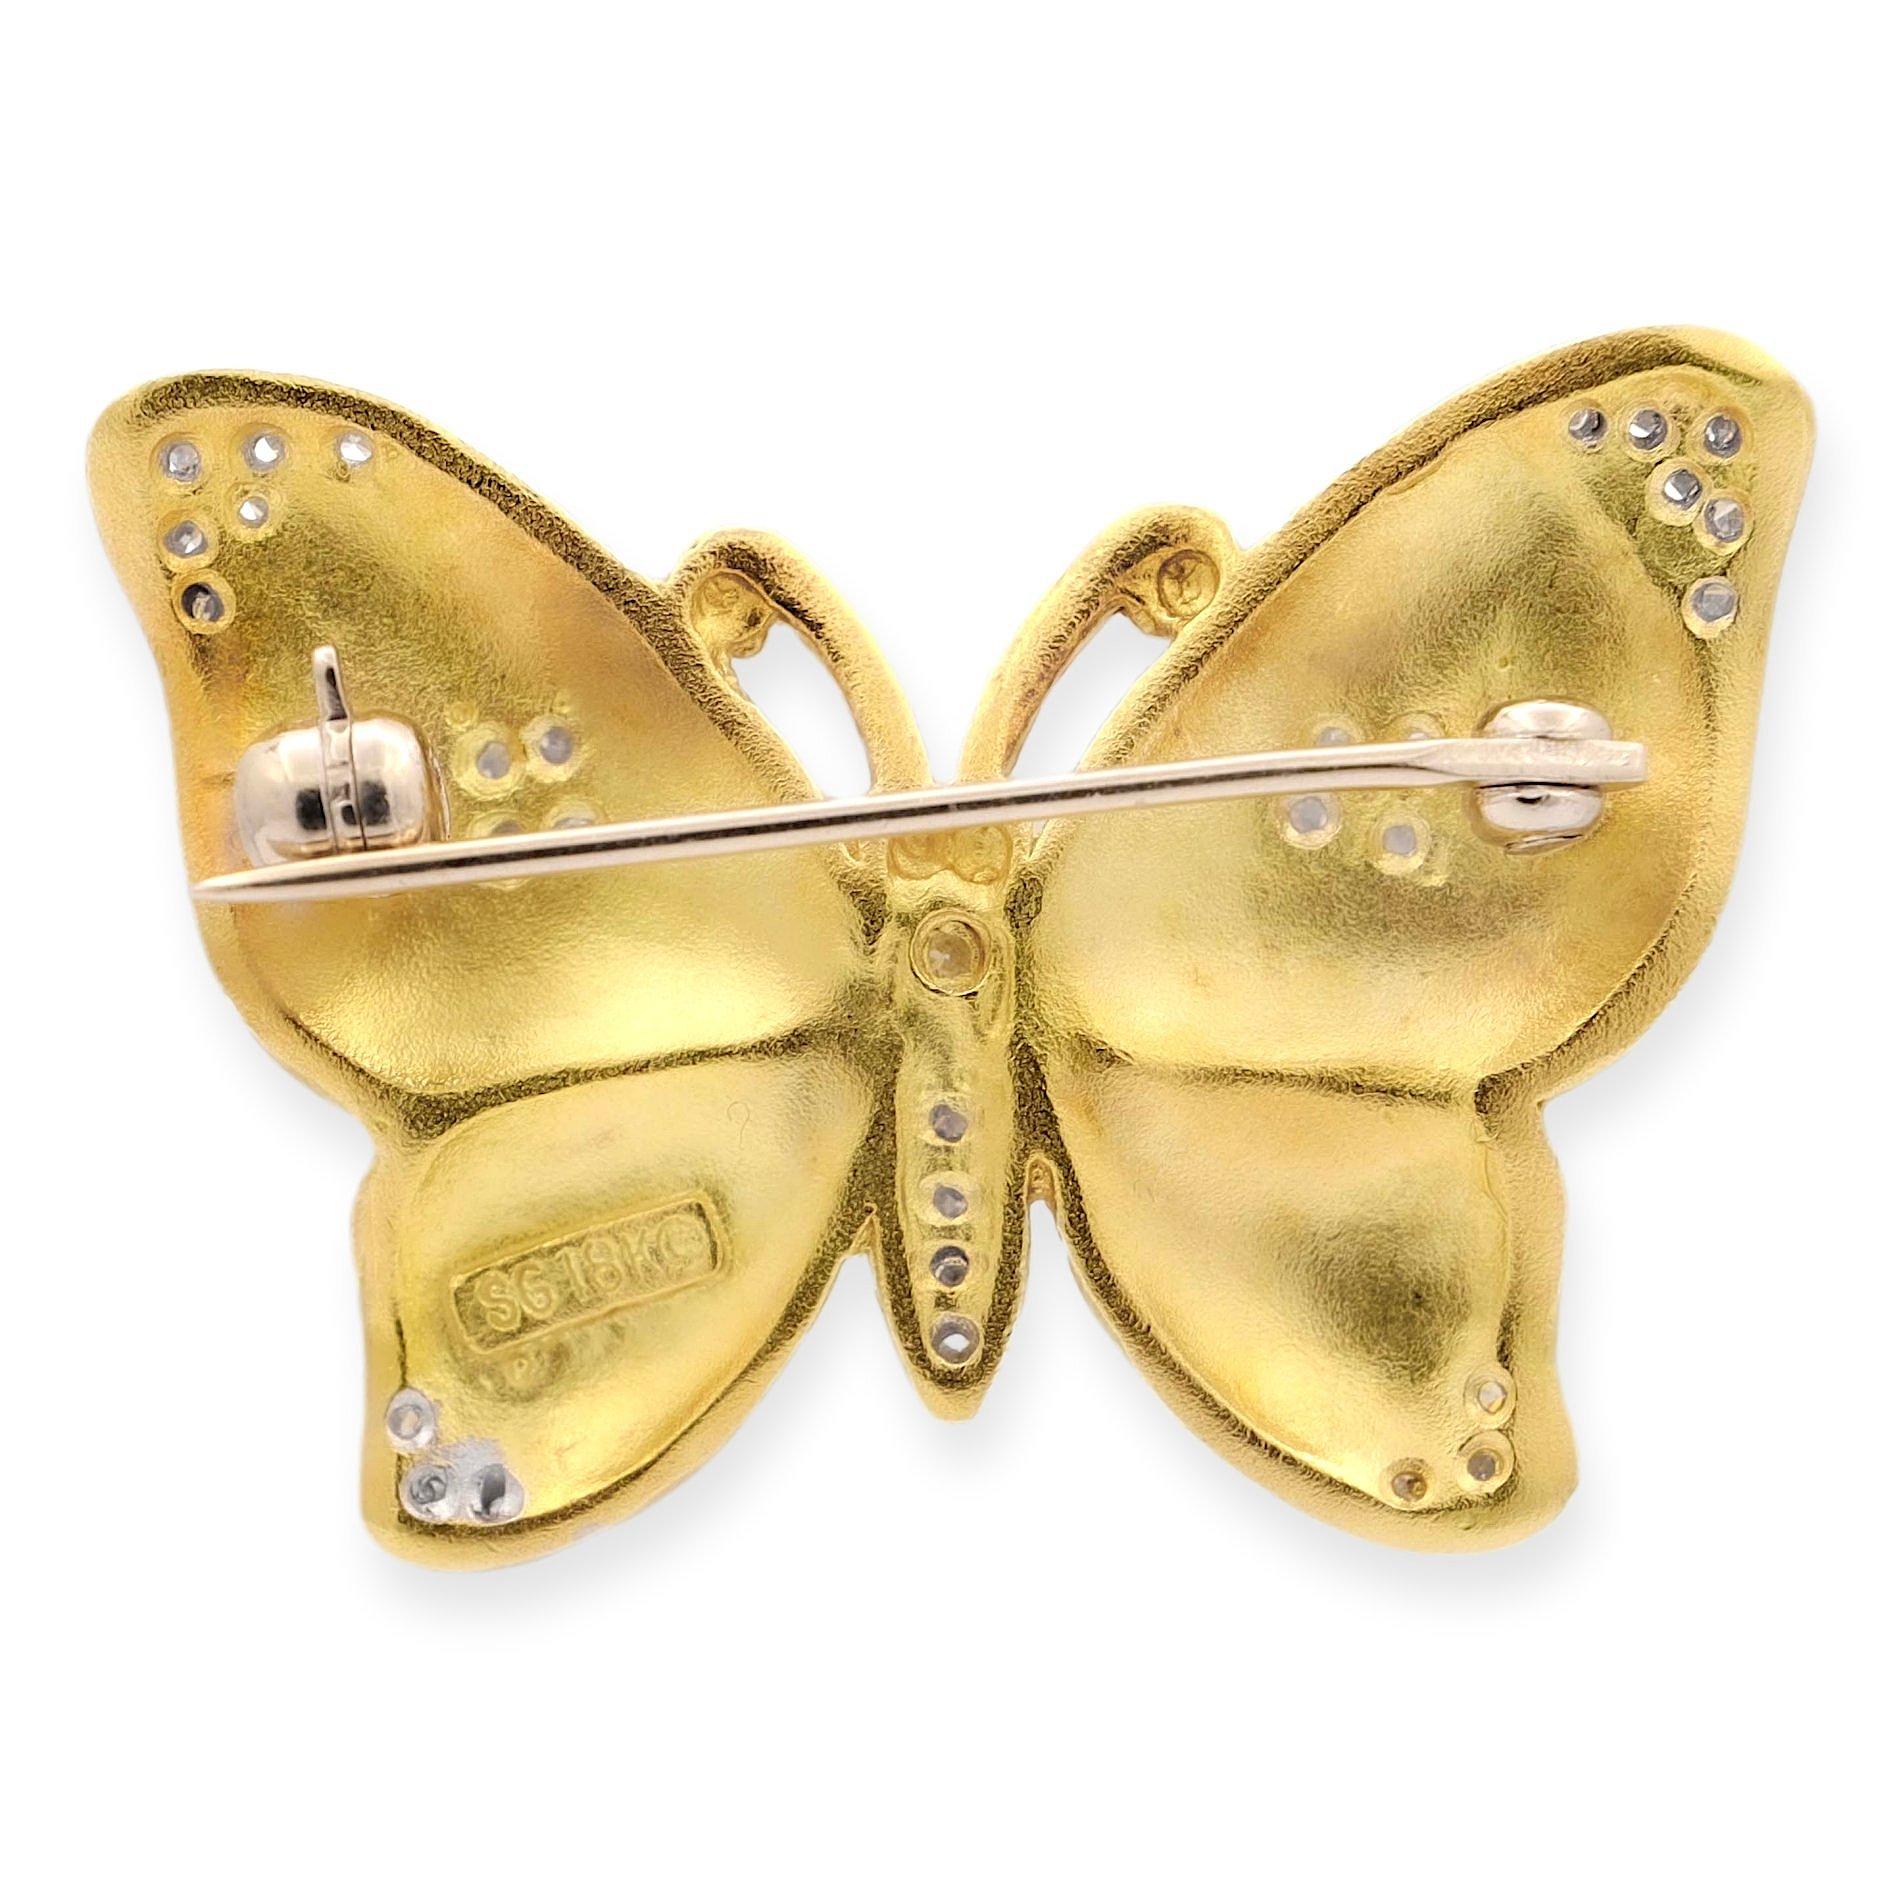 Introducing the Seidengang Brooch: a masterpiece of elegance. Crafted from 18k yellow gold with a satin finish, adorned with approximately 0.33 carats of round brilliant cut diamonds set in white gold. Weighing 9.4 grams, it's a radiant and